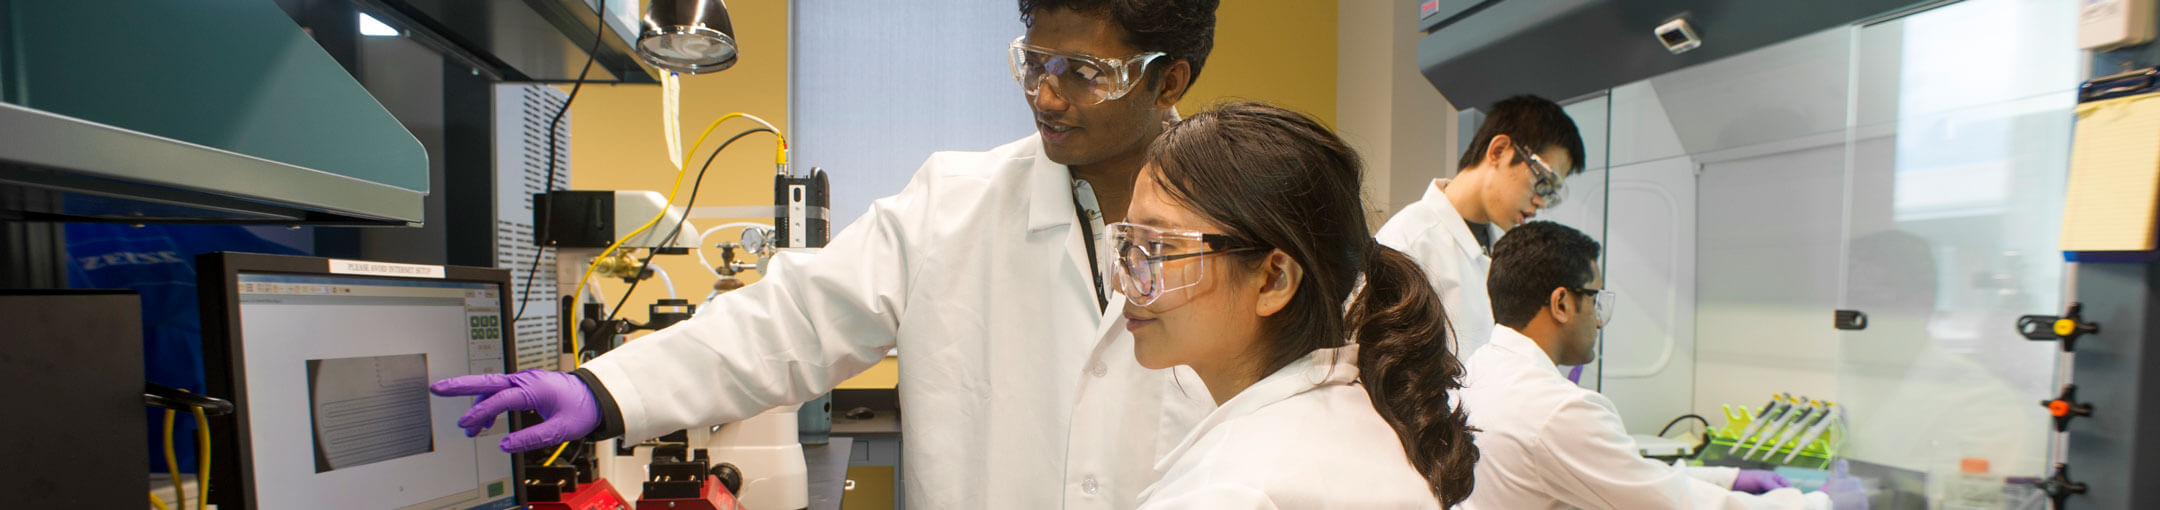 Four RIT student researchers working in a lab.